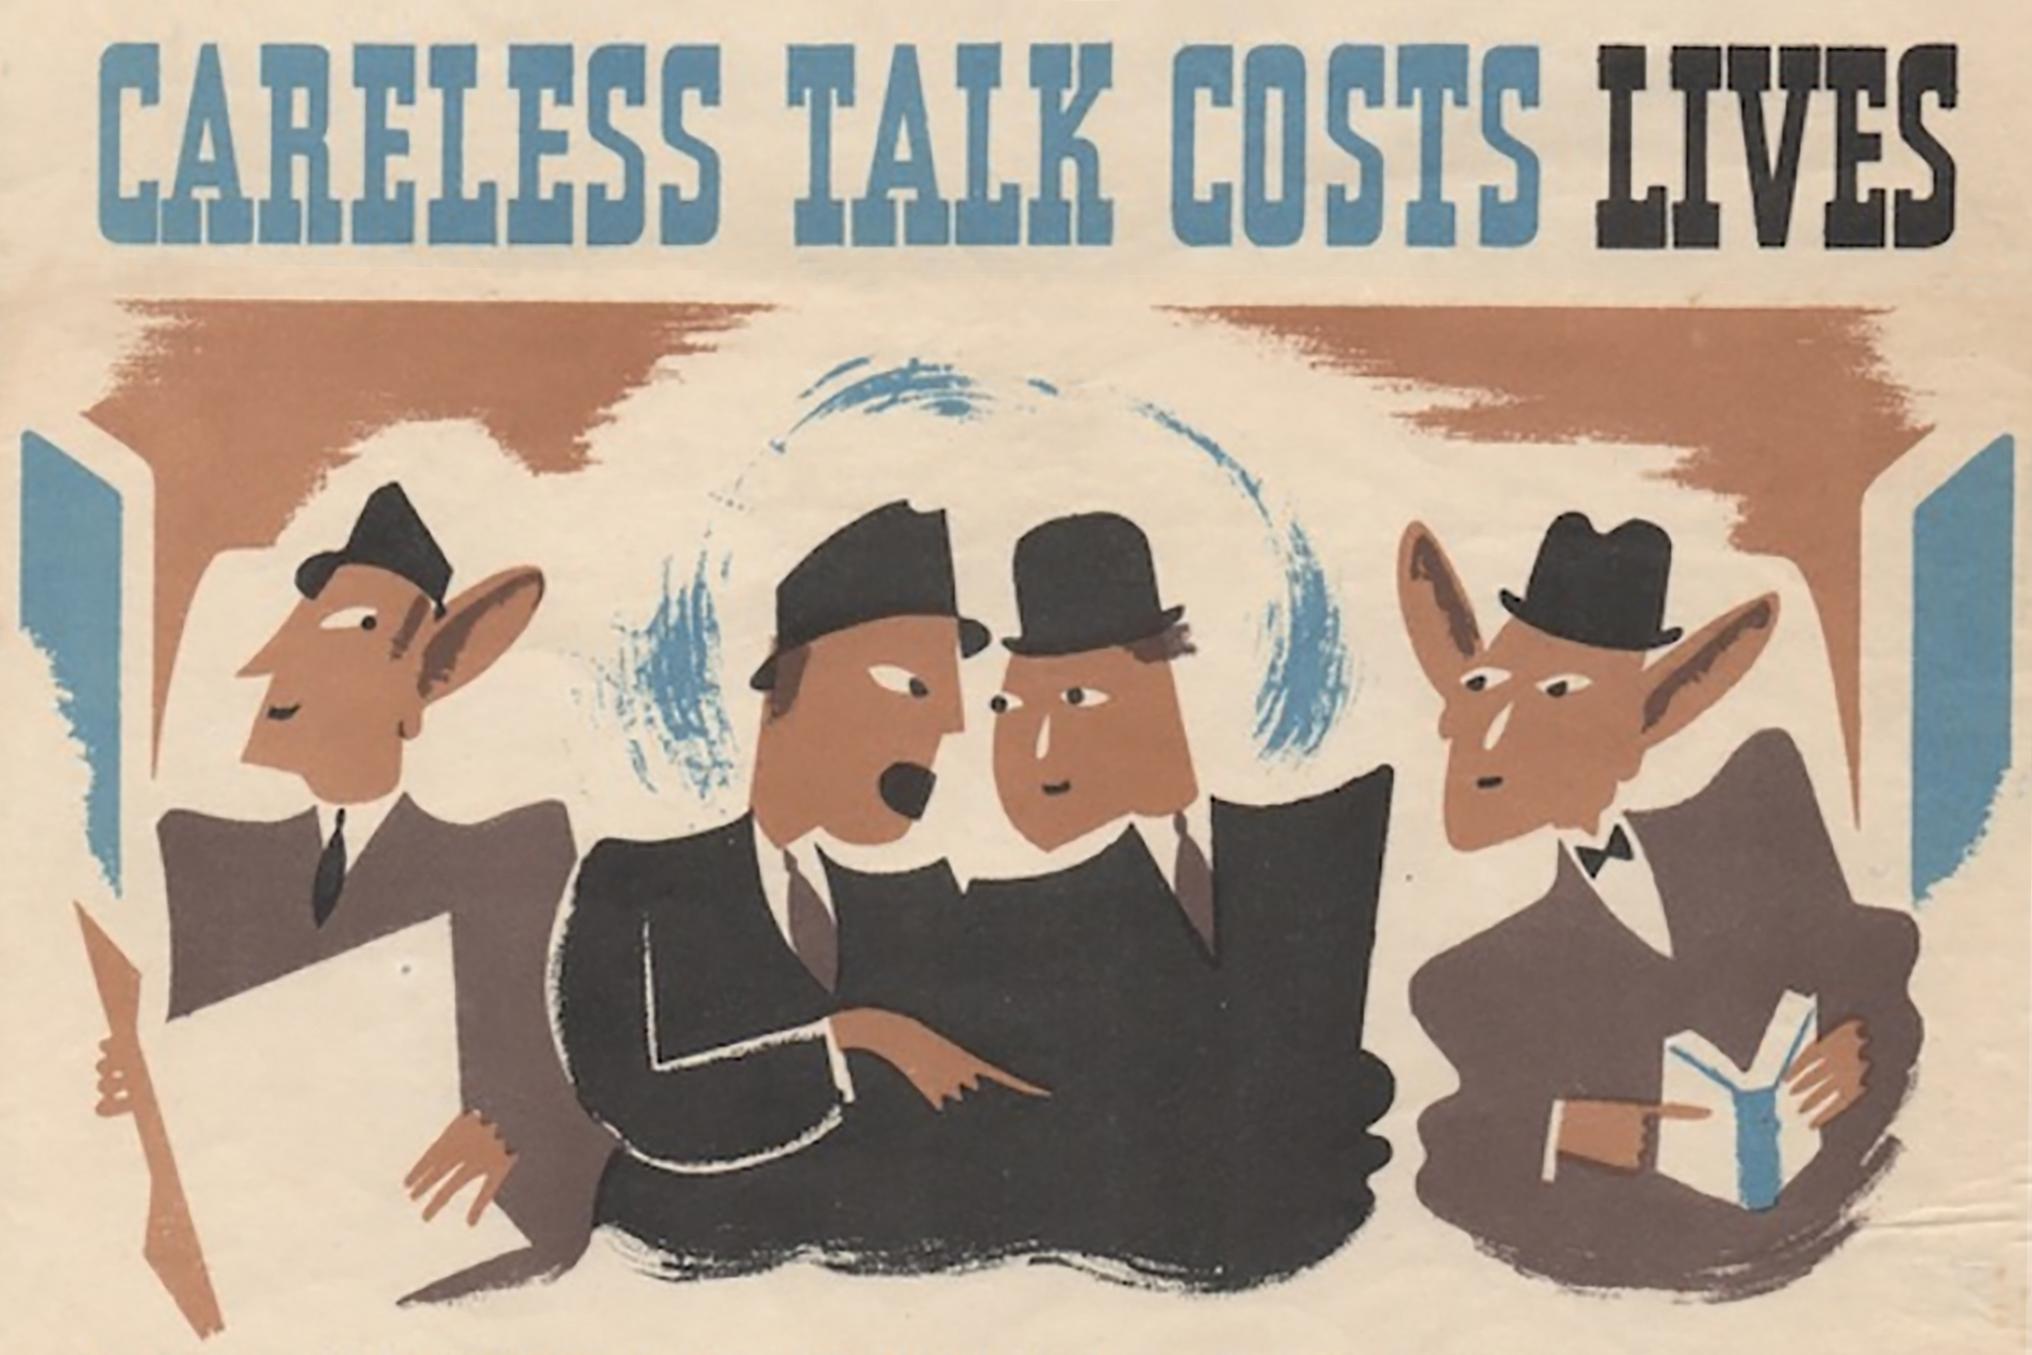 Government printed countless propaganda posters during the Second World War to discourage discussion on sensitive topics